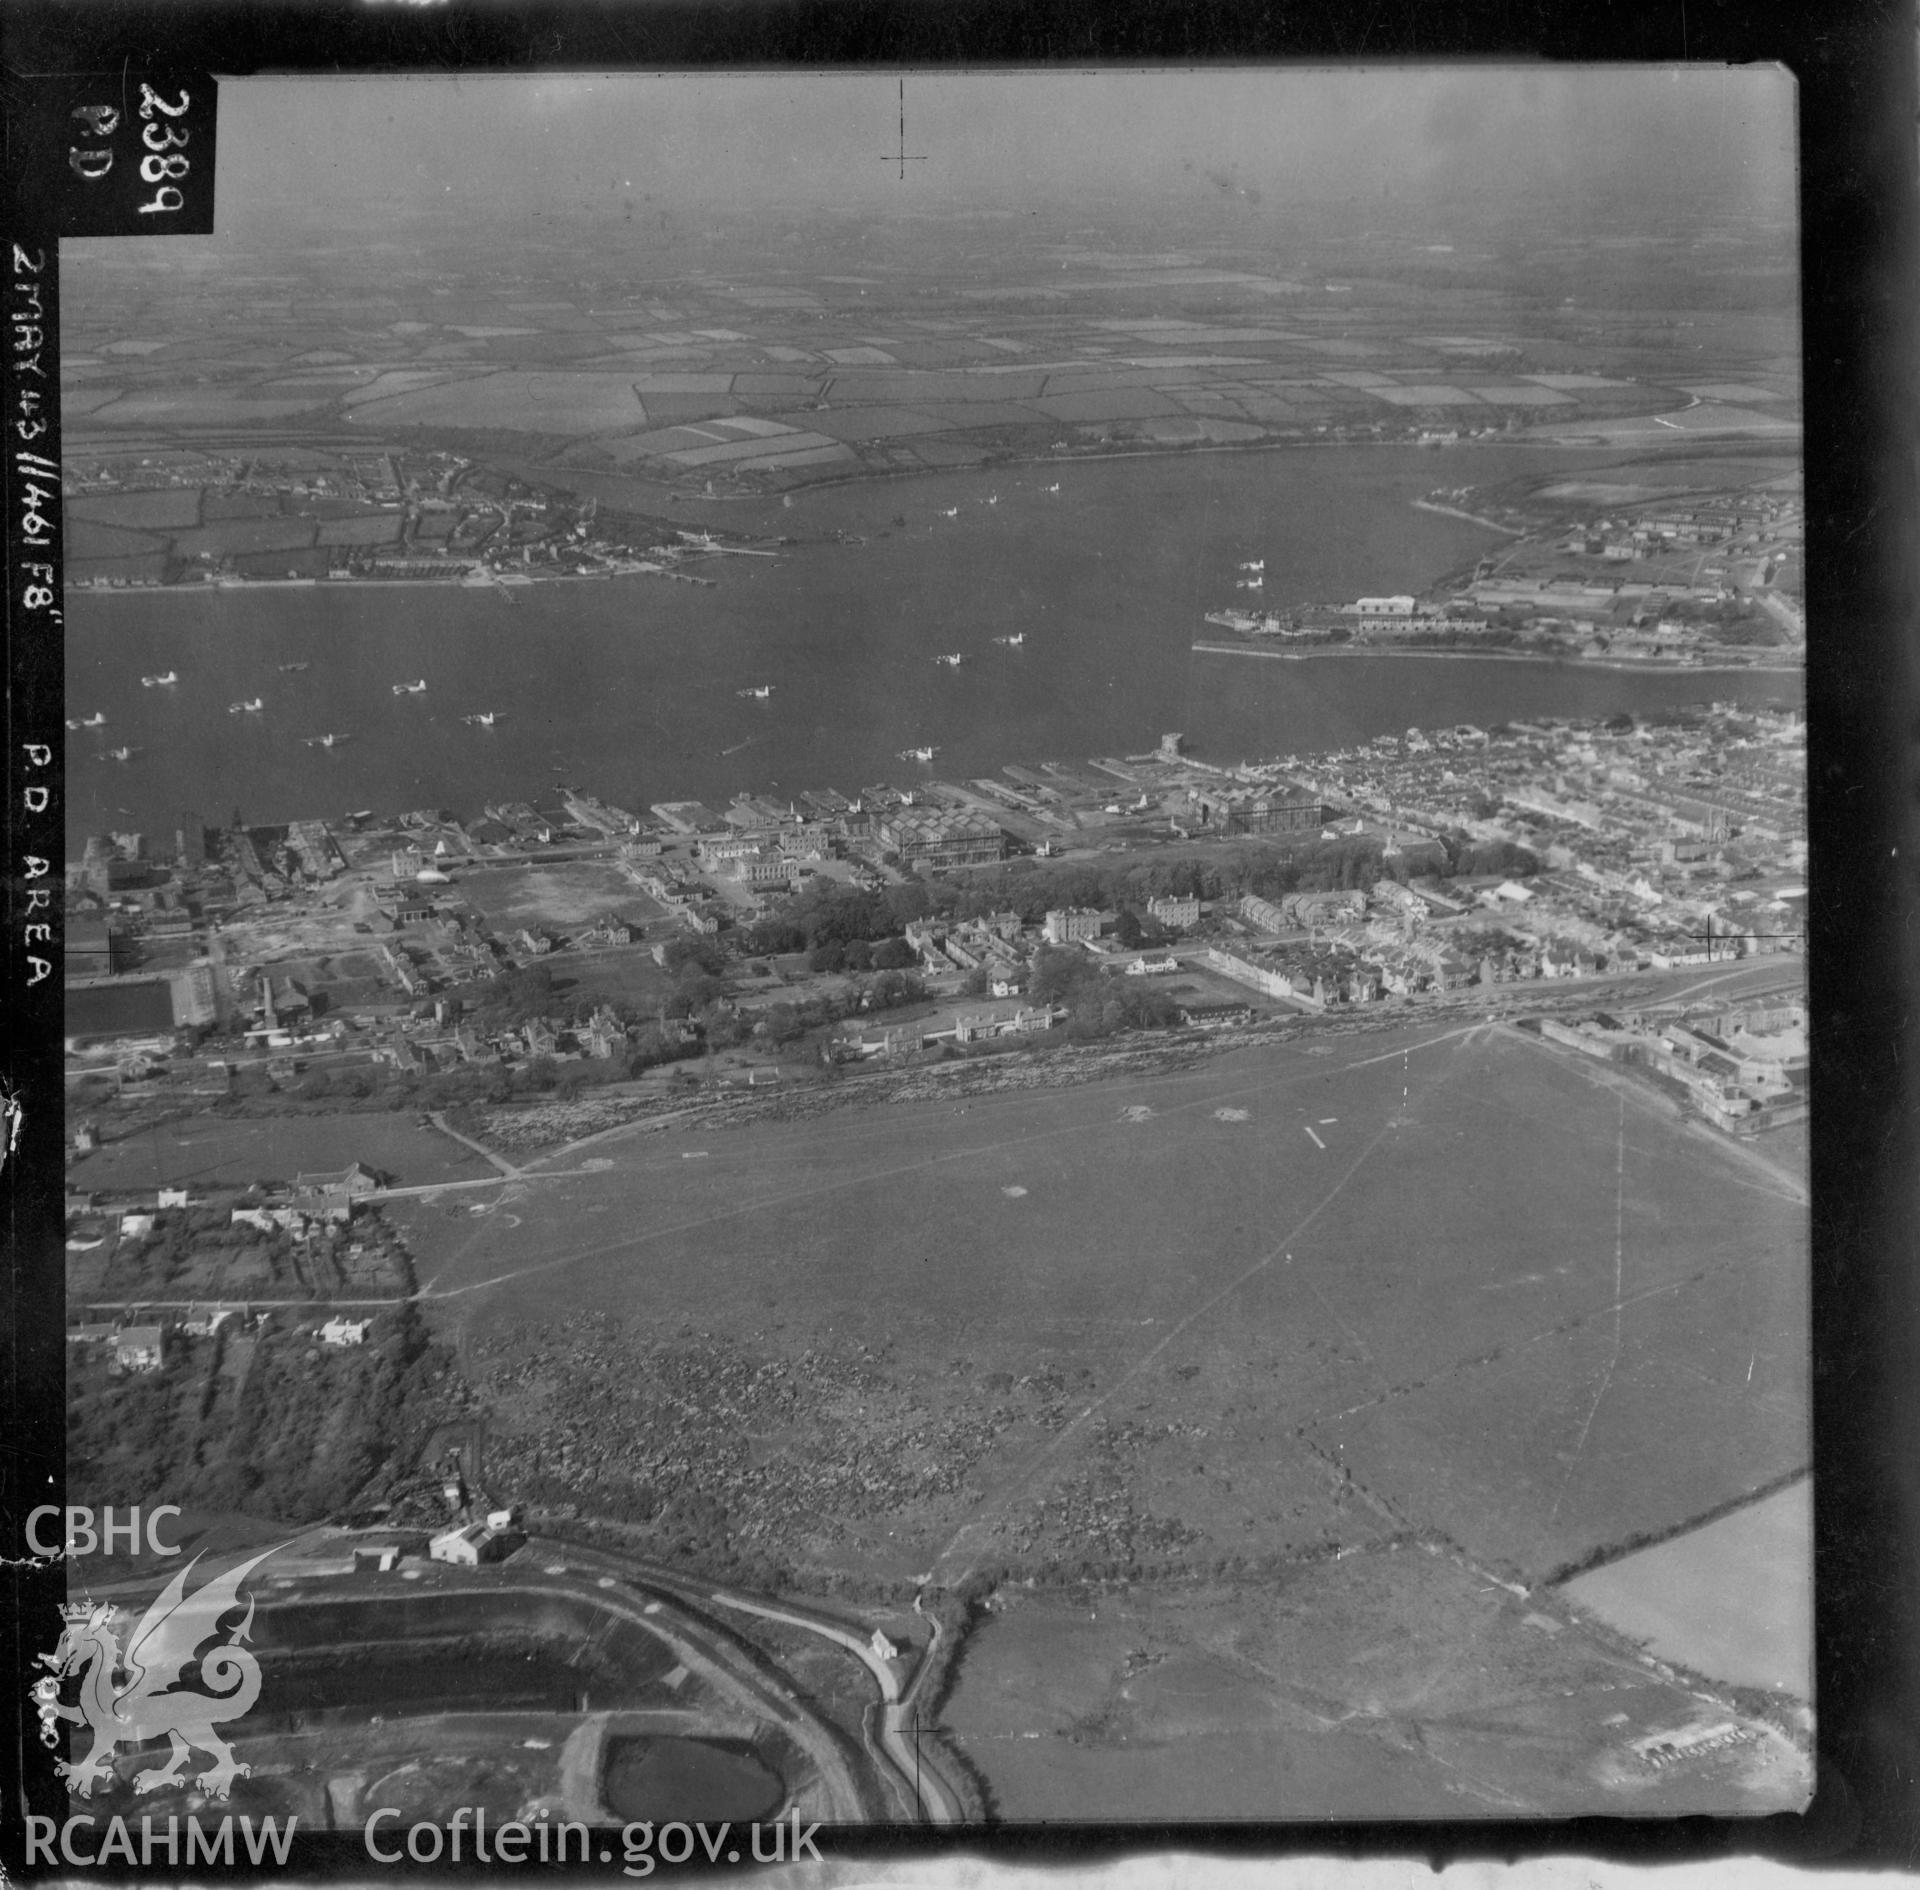 Aerial view of Pembroke Dock taken by the Royal Air Force, dated 2nd May 1943. Digitised from a print loaned for copying by David Green.